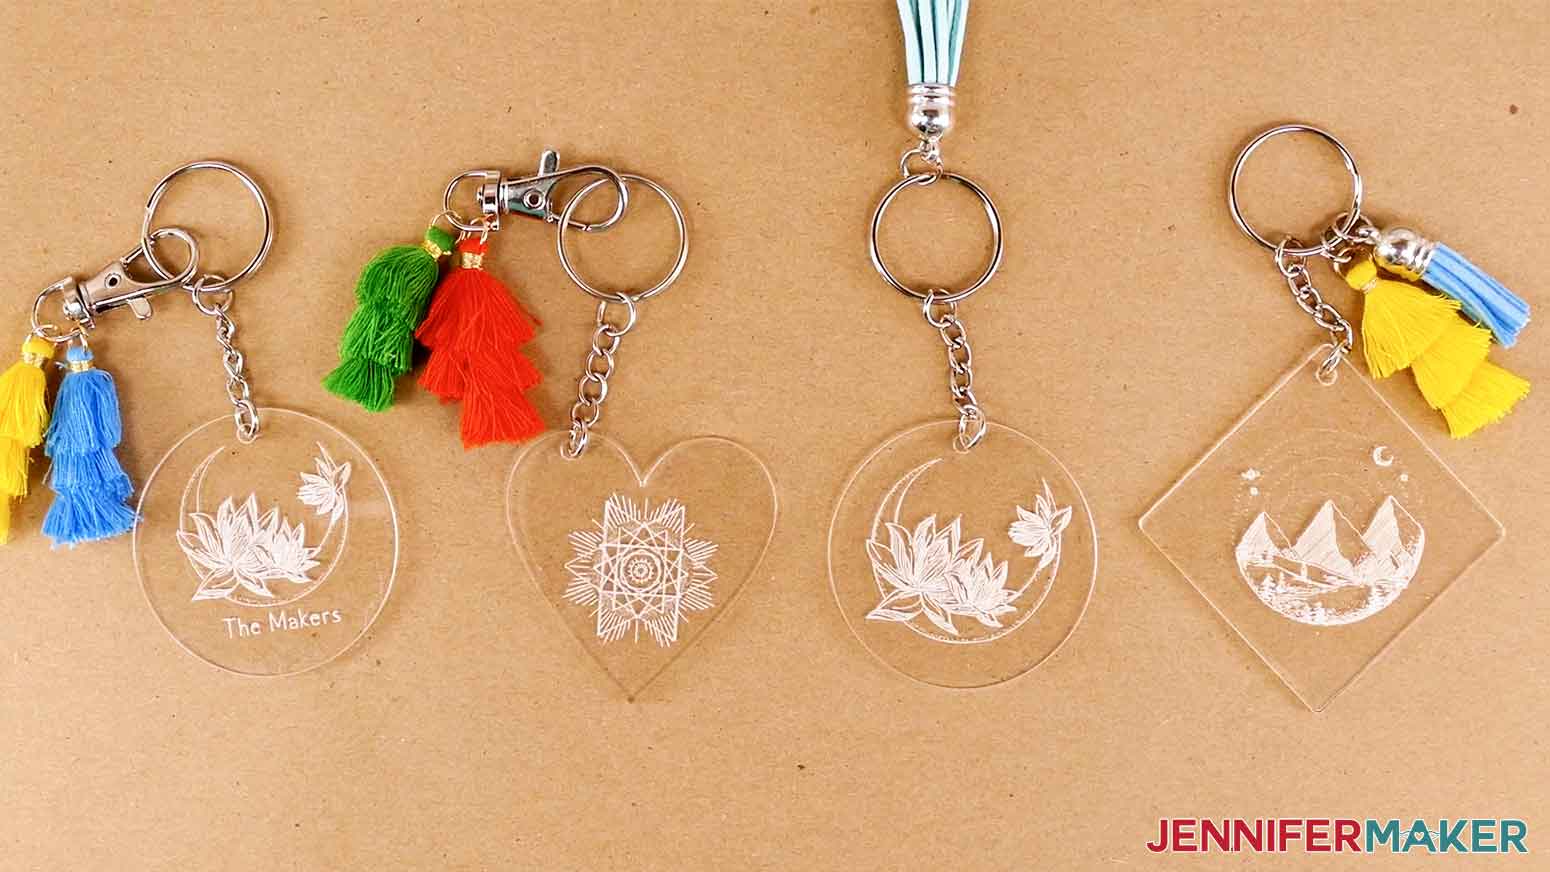 A picture of a variety of acrylic engraving on keychains.